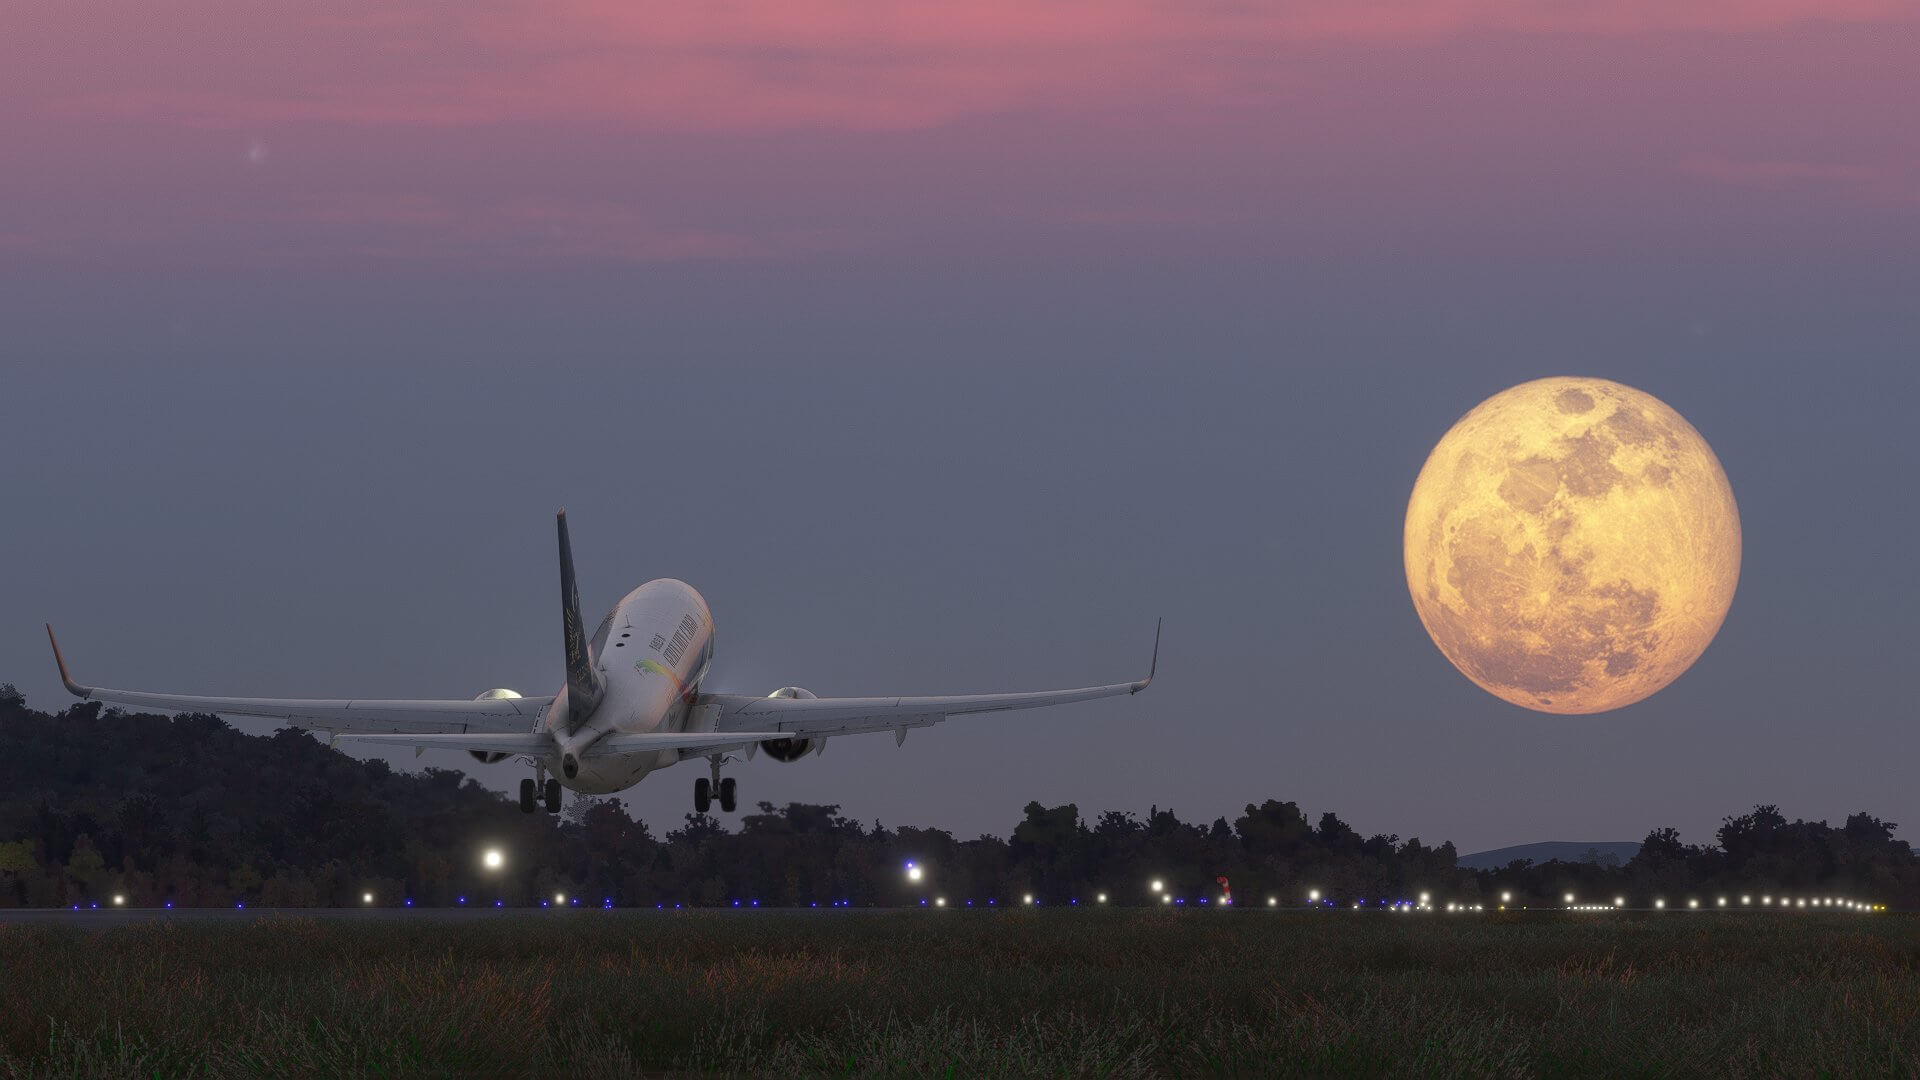 A Boeing 737 rotates and lifts off from the runway towards a full moon in the distance.